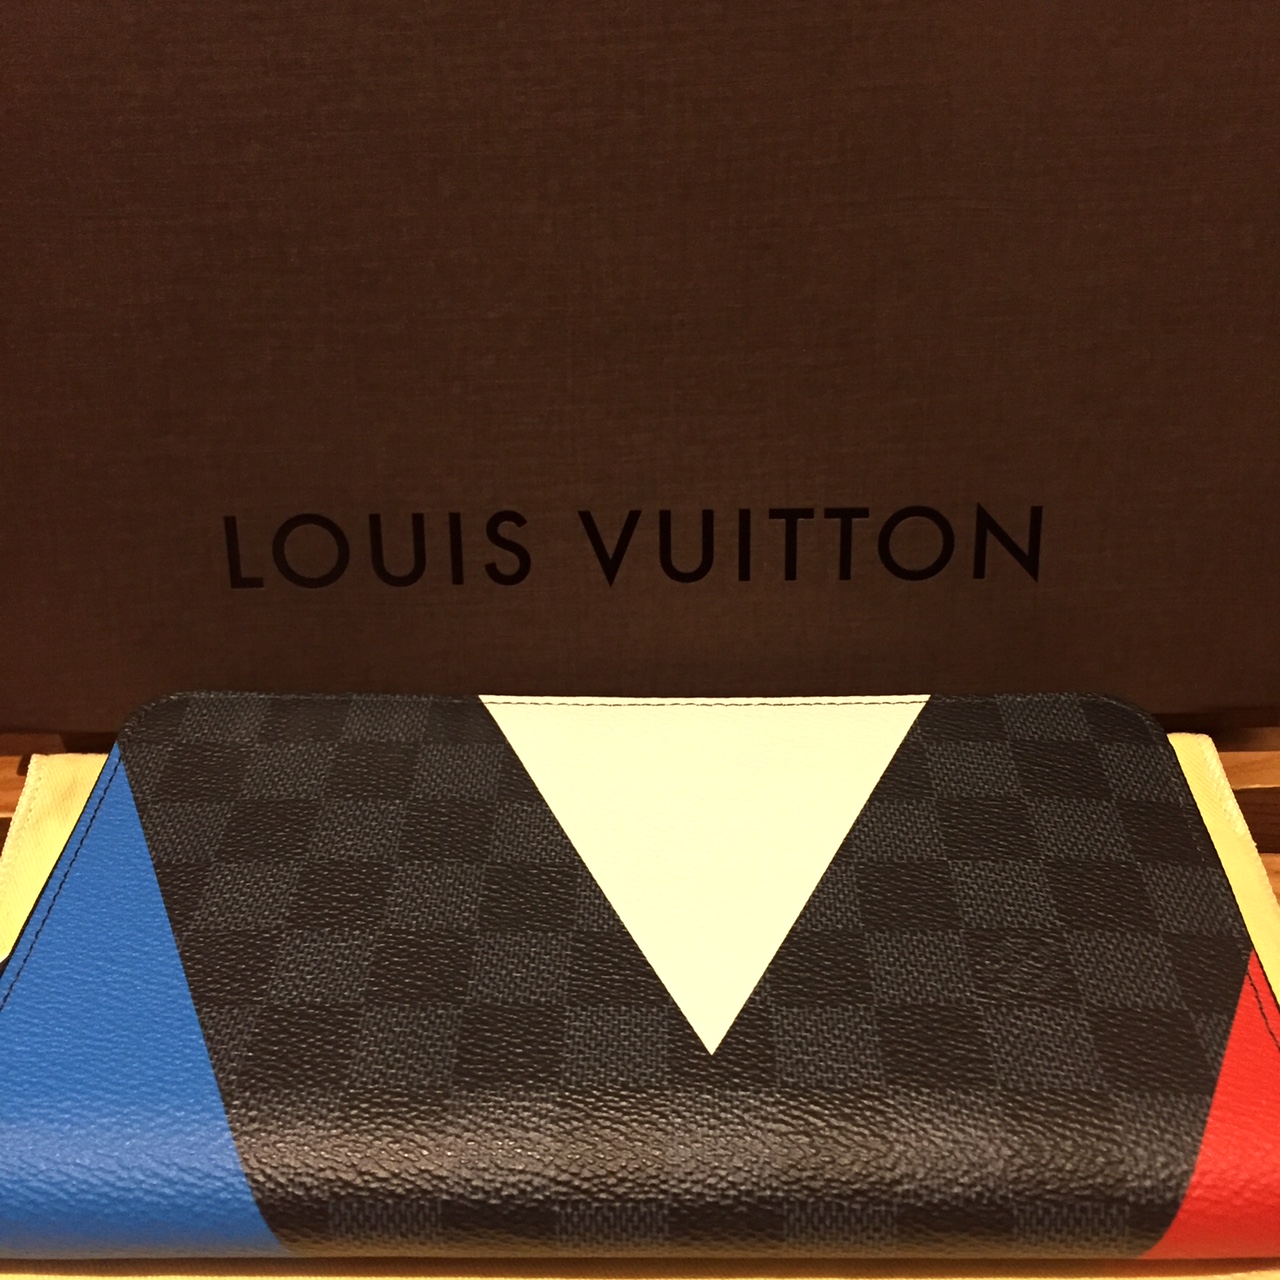 LLOUIS VUITTON×America's Cup ジッピー・オーガナイザー